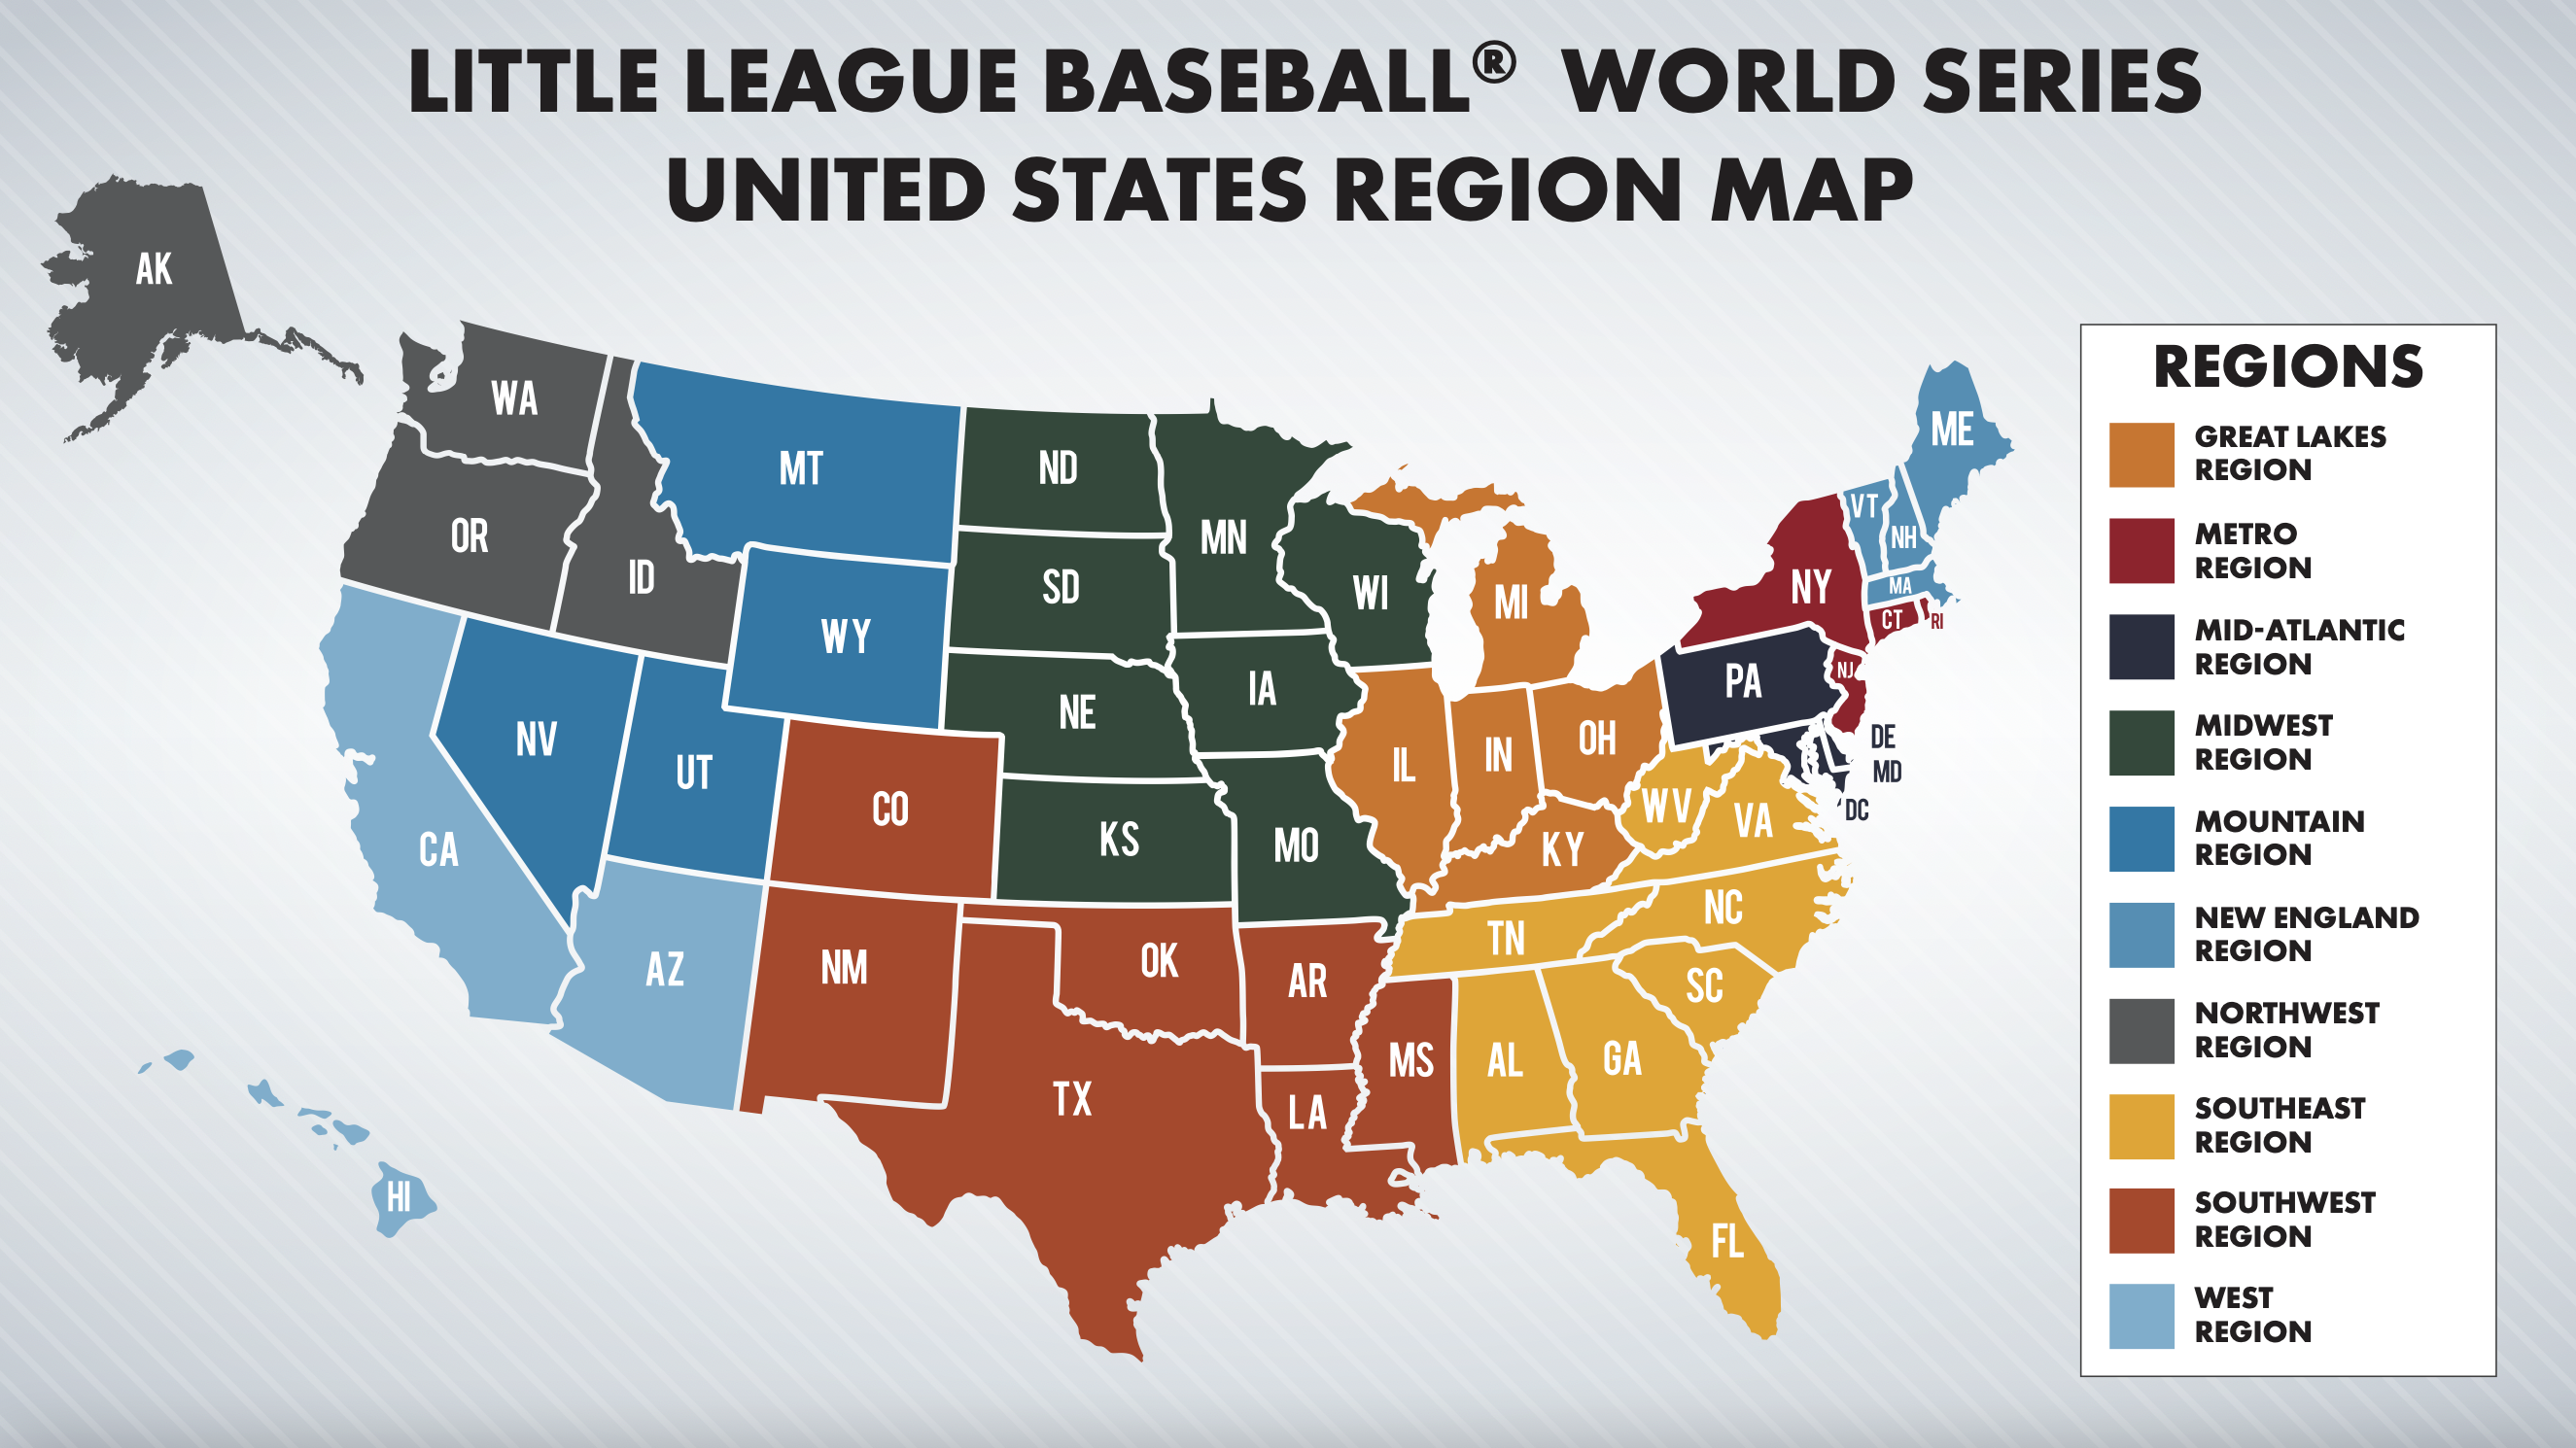 Llws Schedule 2022 Little League Realigns Us Regions In Preparation For World Series Expansion  In 2022: See Who Pa. Will Play - Pennlive.com